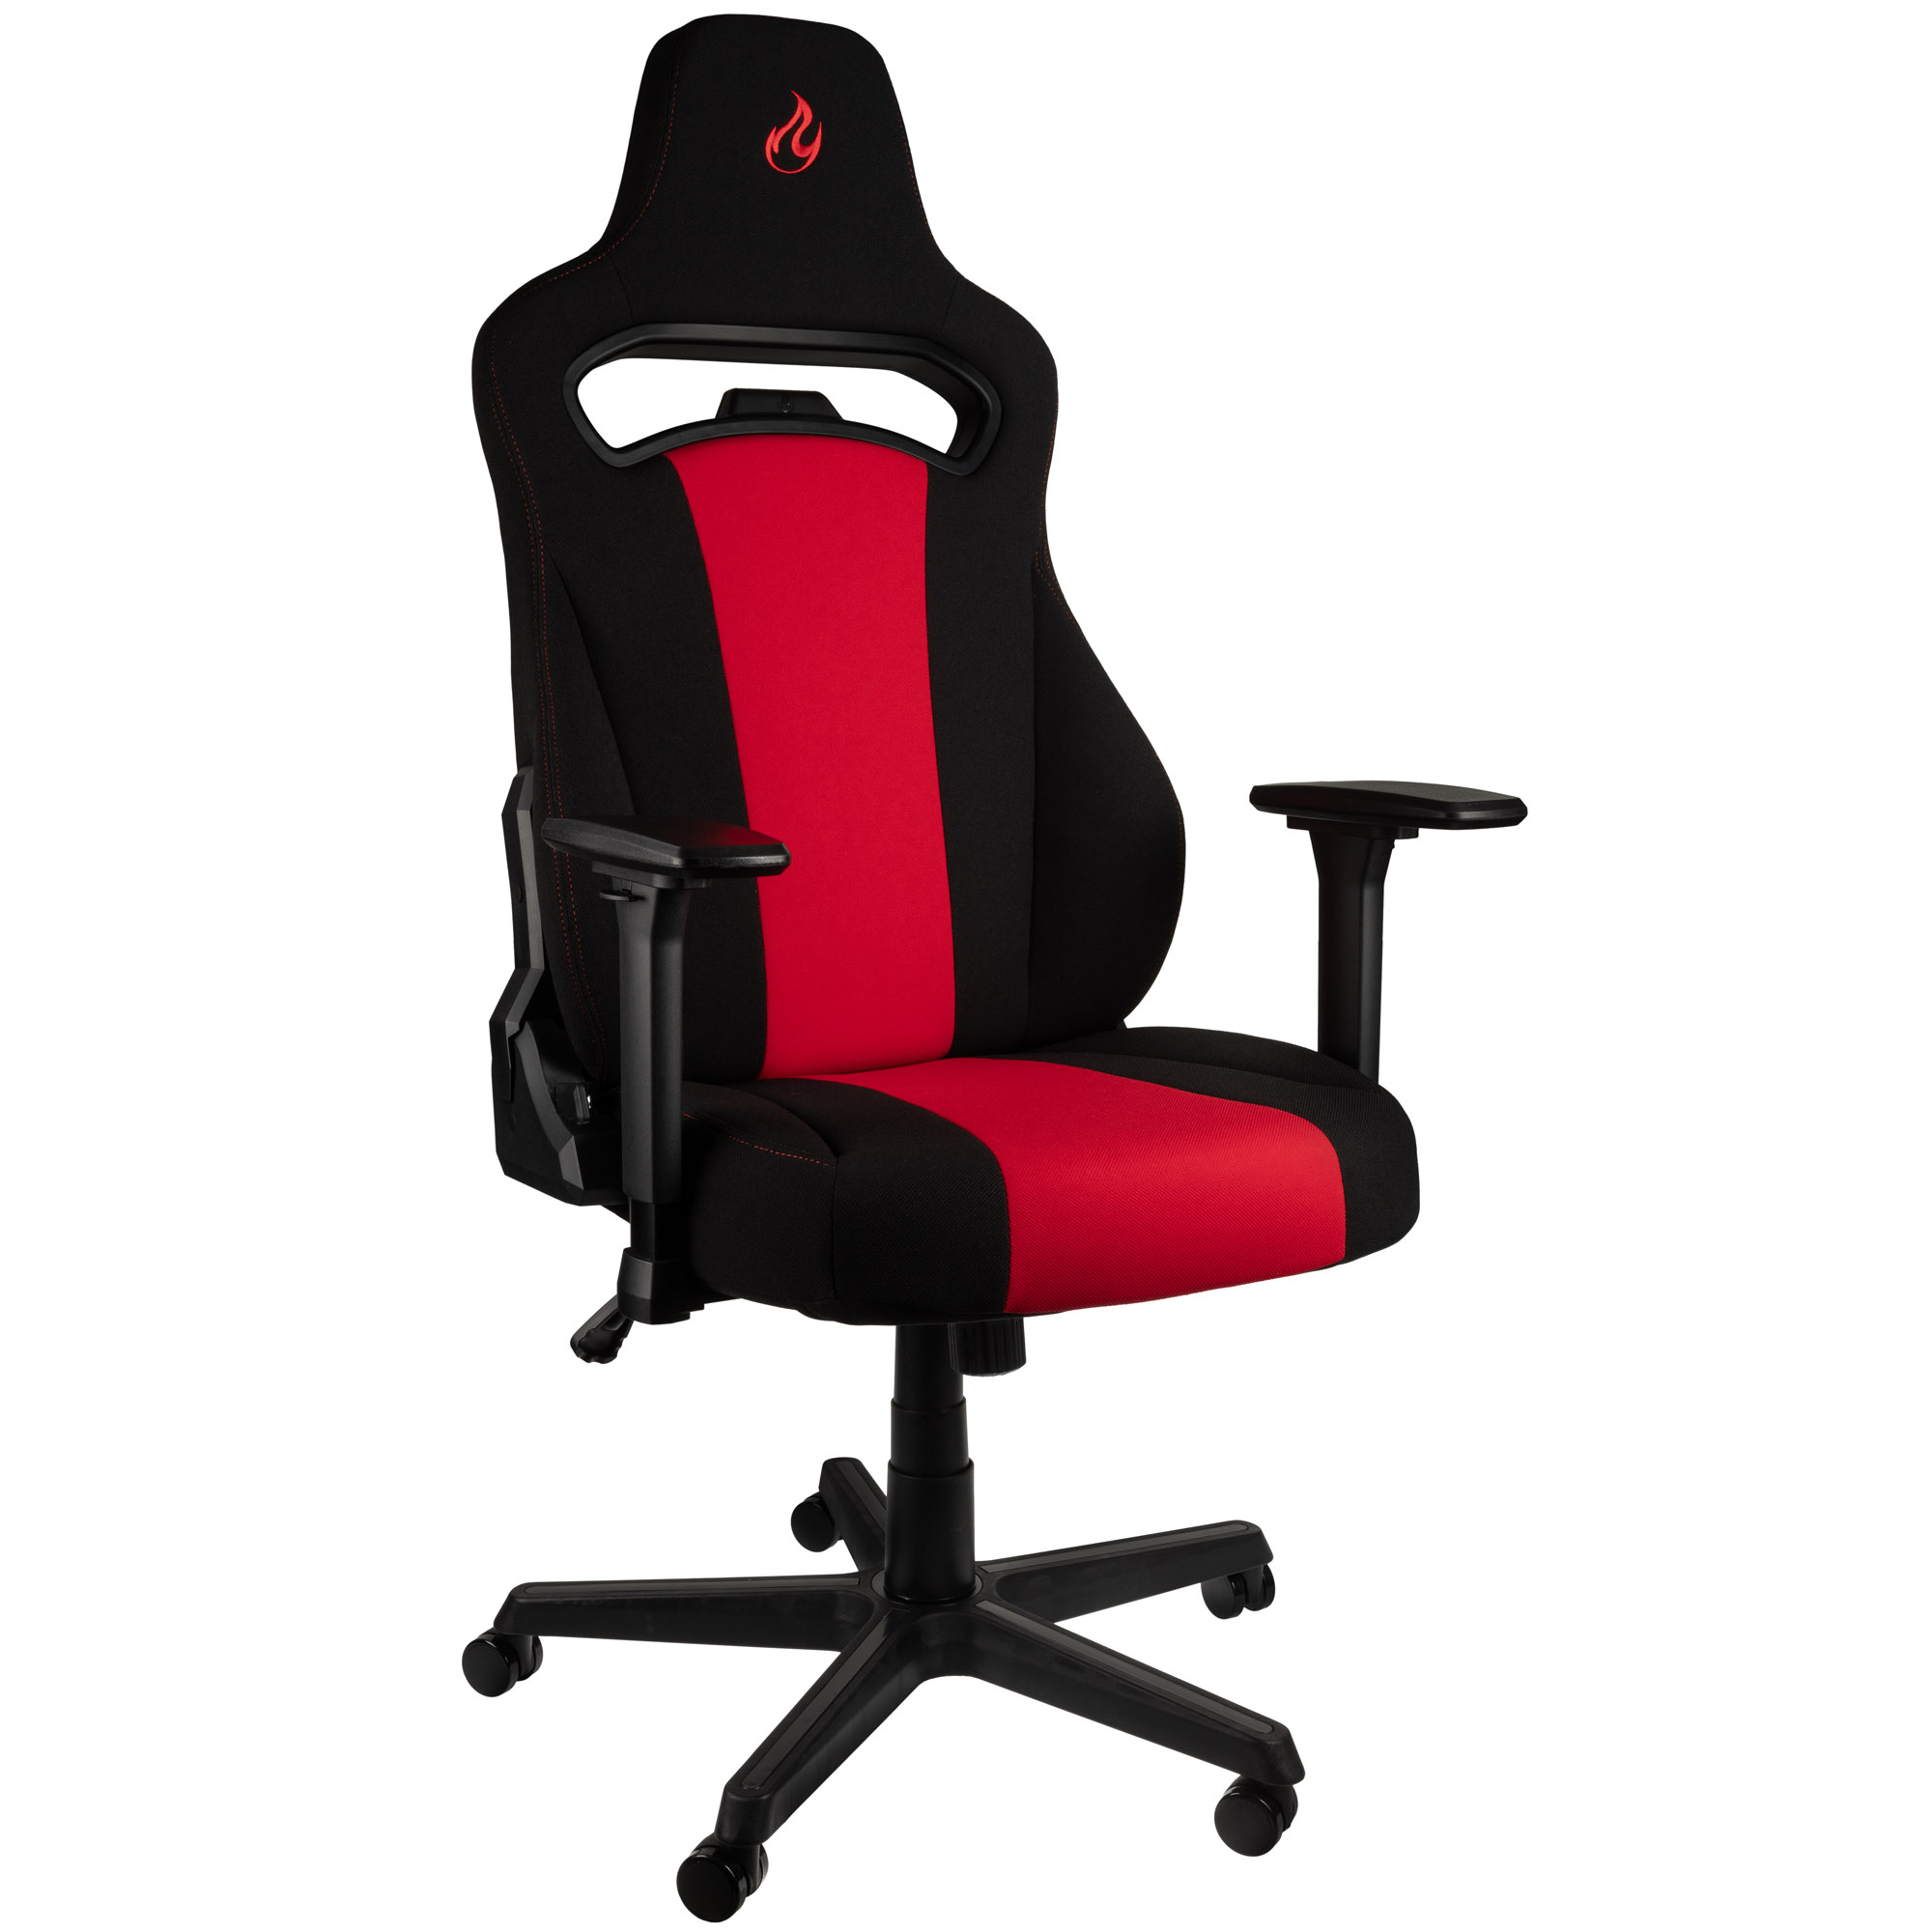 Nitro Concepts - E250 Gaming Chair - Black / Red